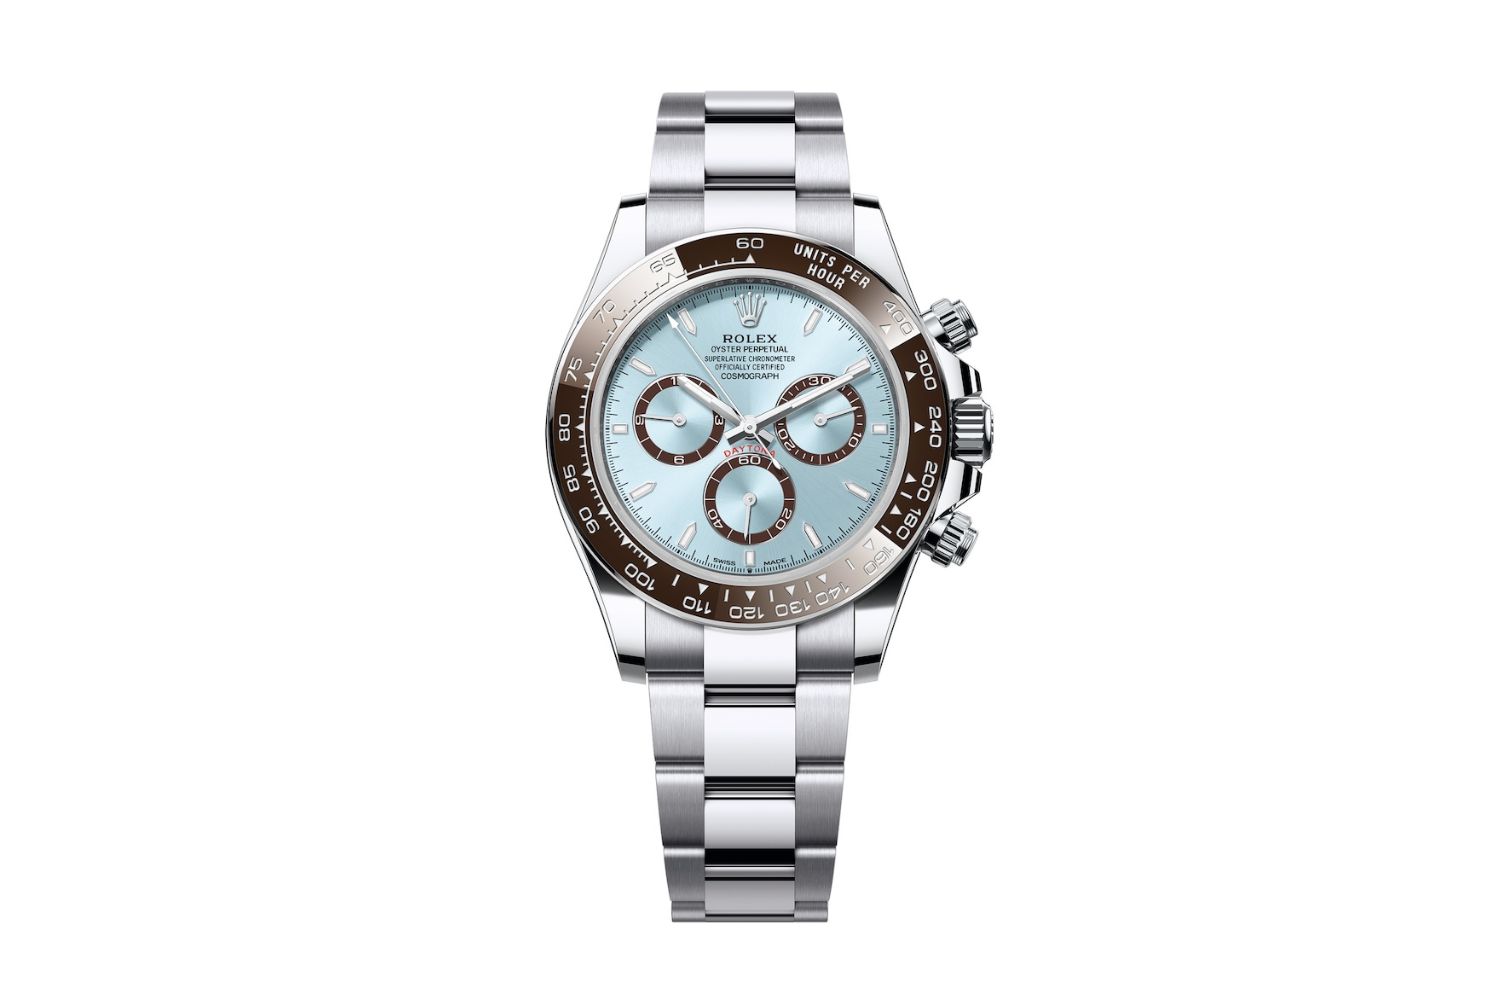 Introducing the Rolex Oyster Perpetual Cosmograph Daytona